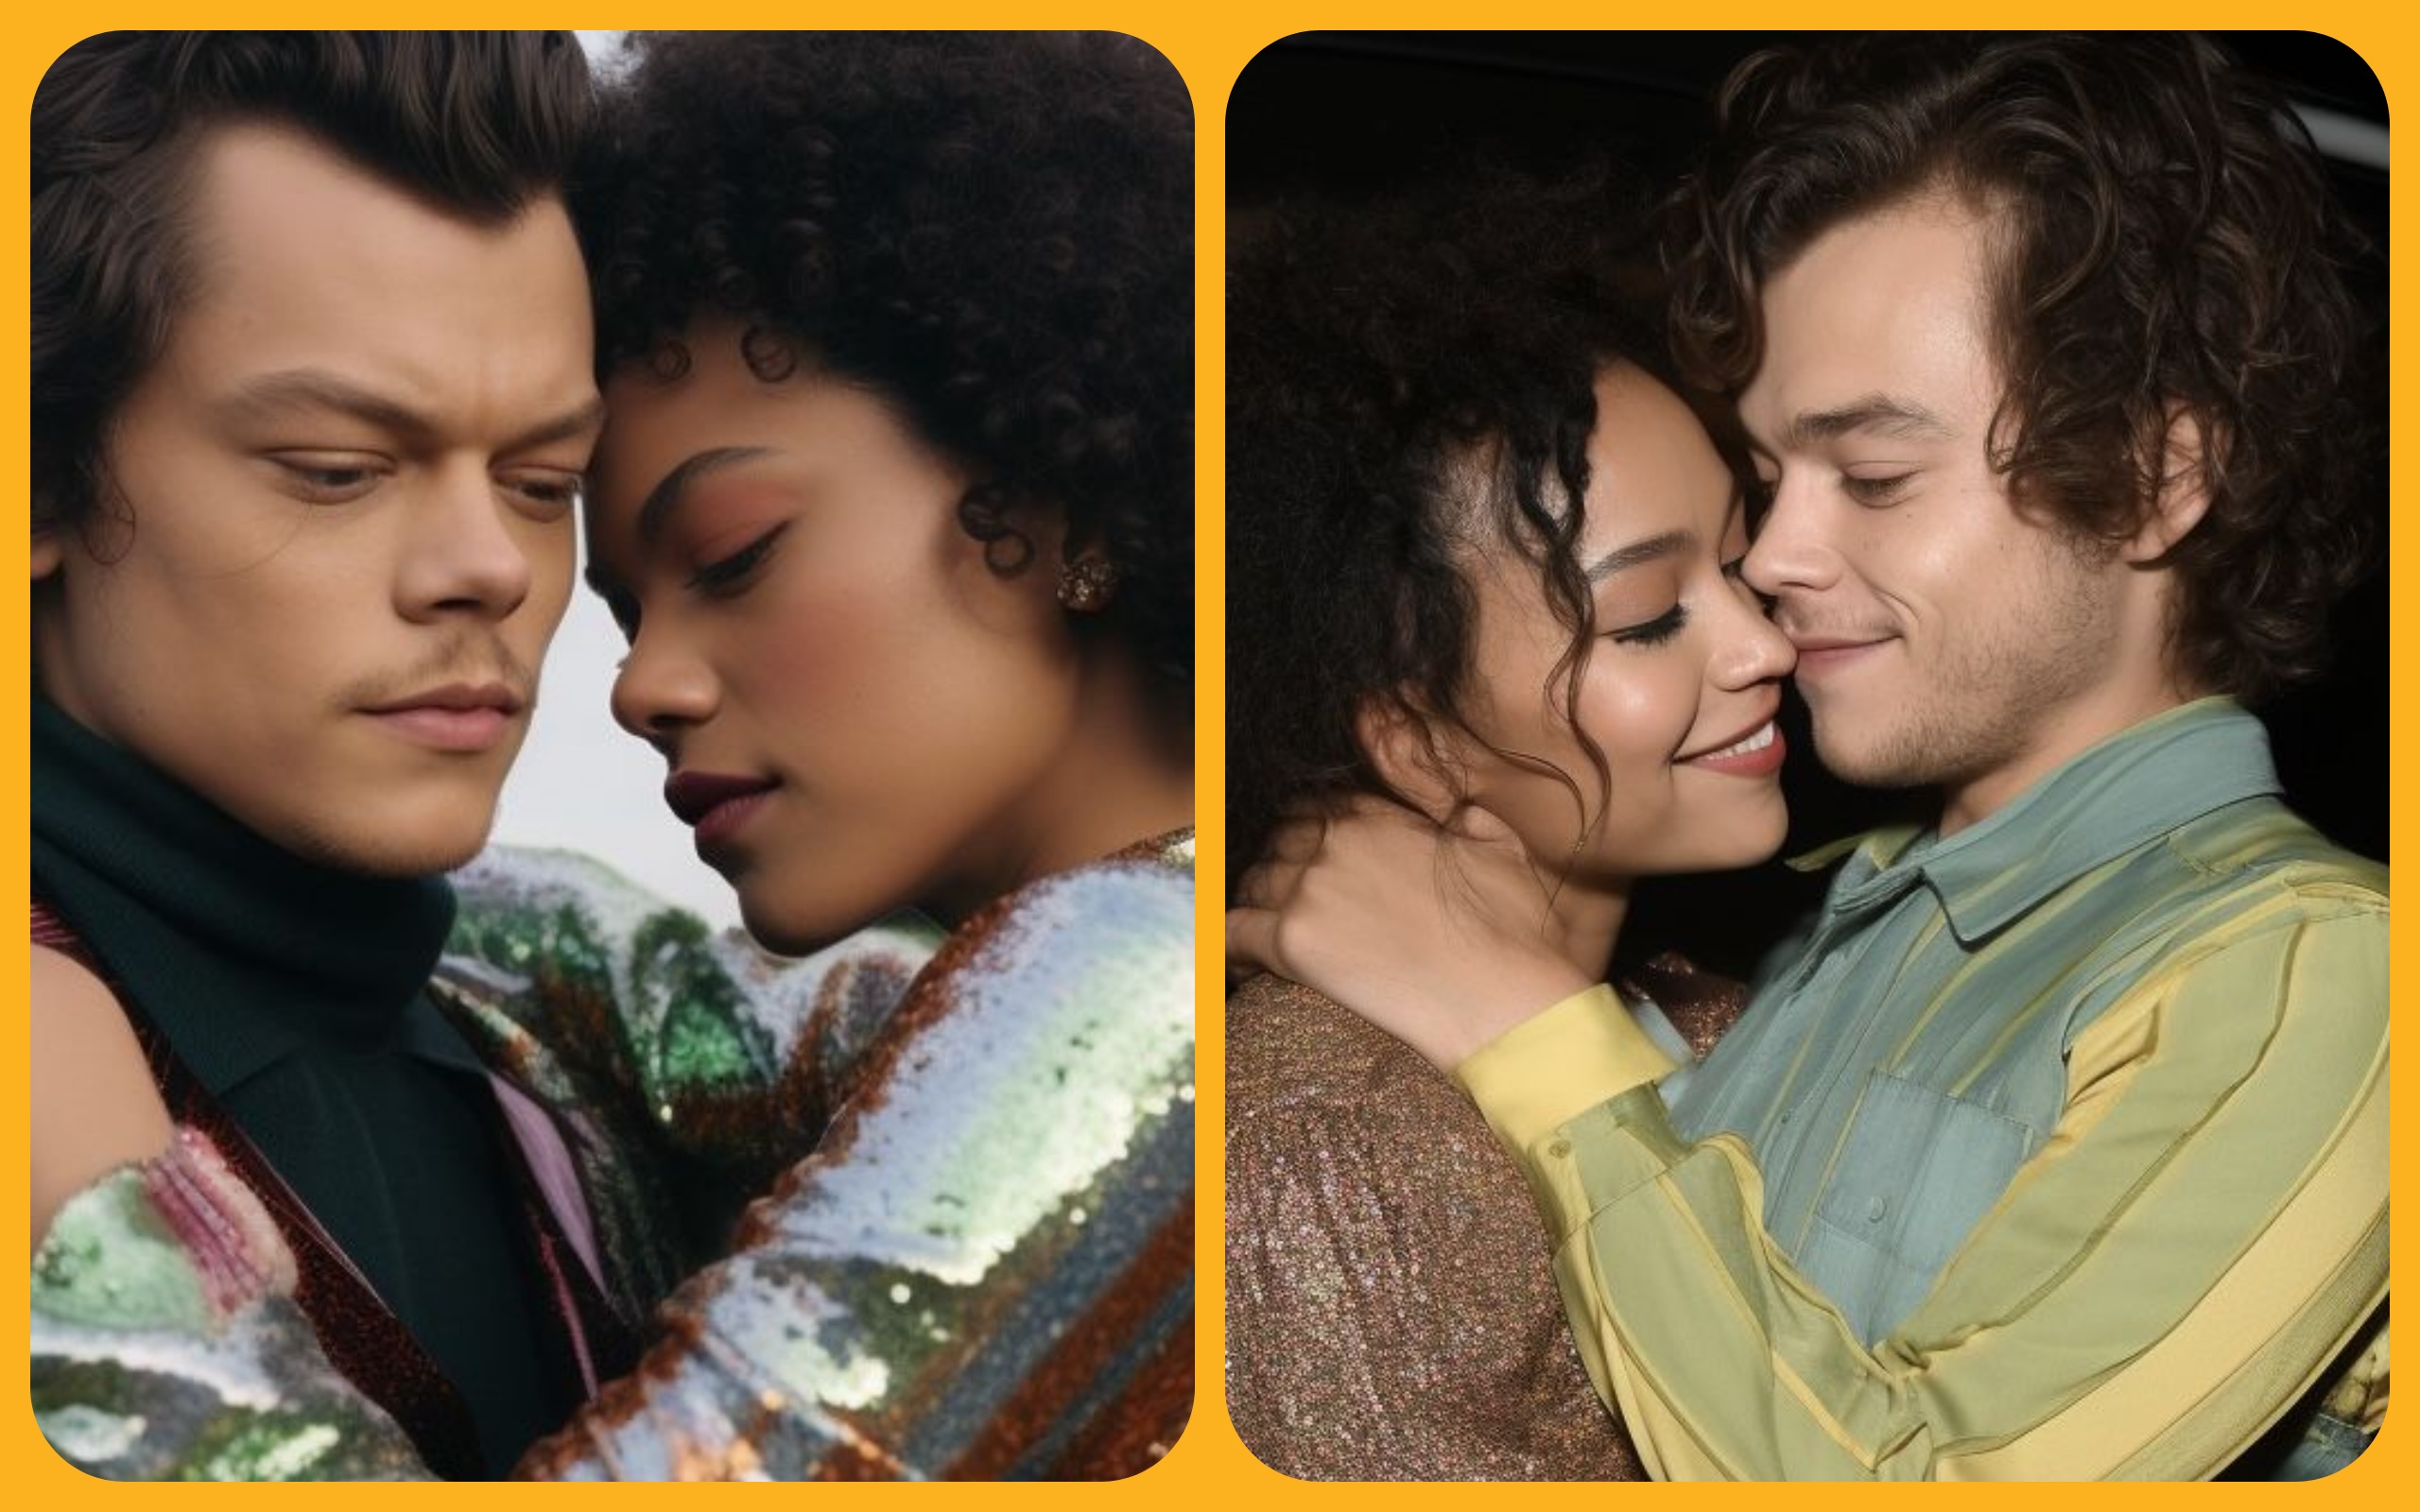 harry styles and taylor russell